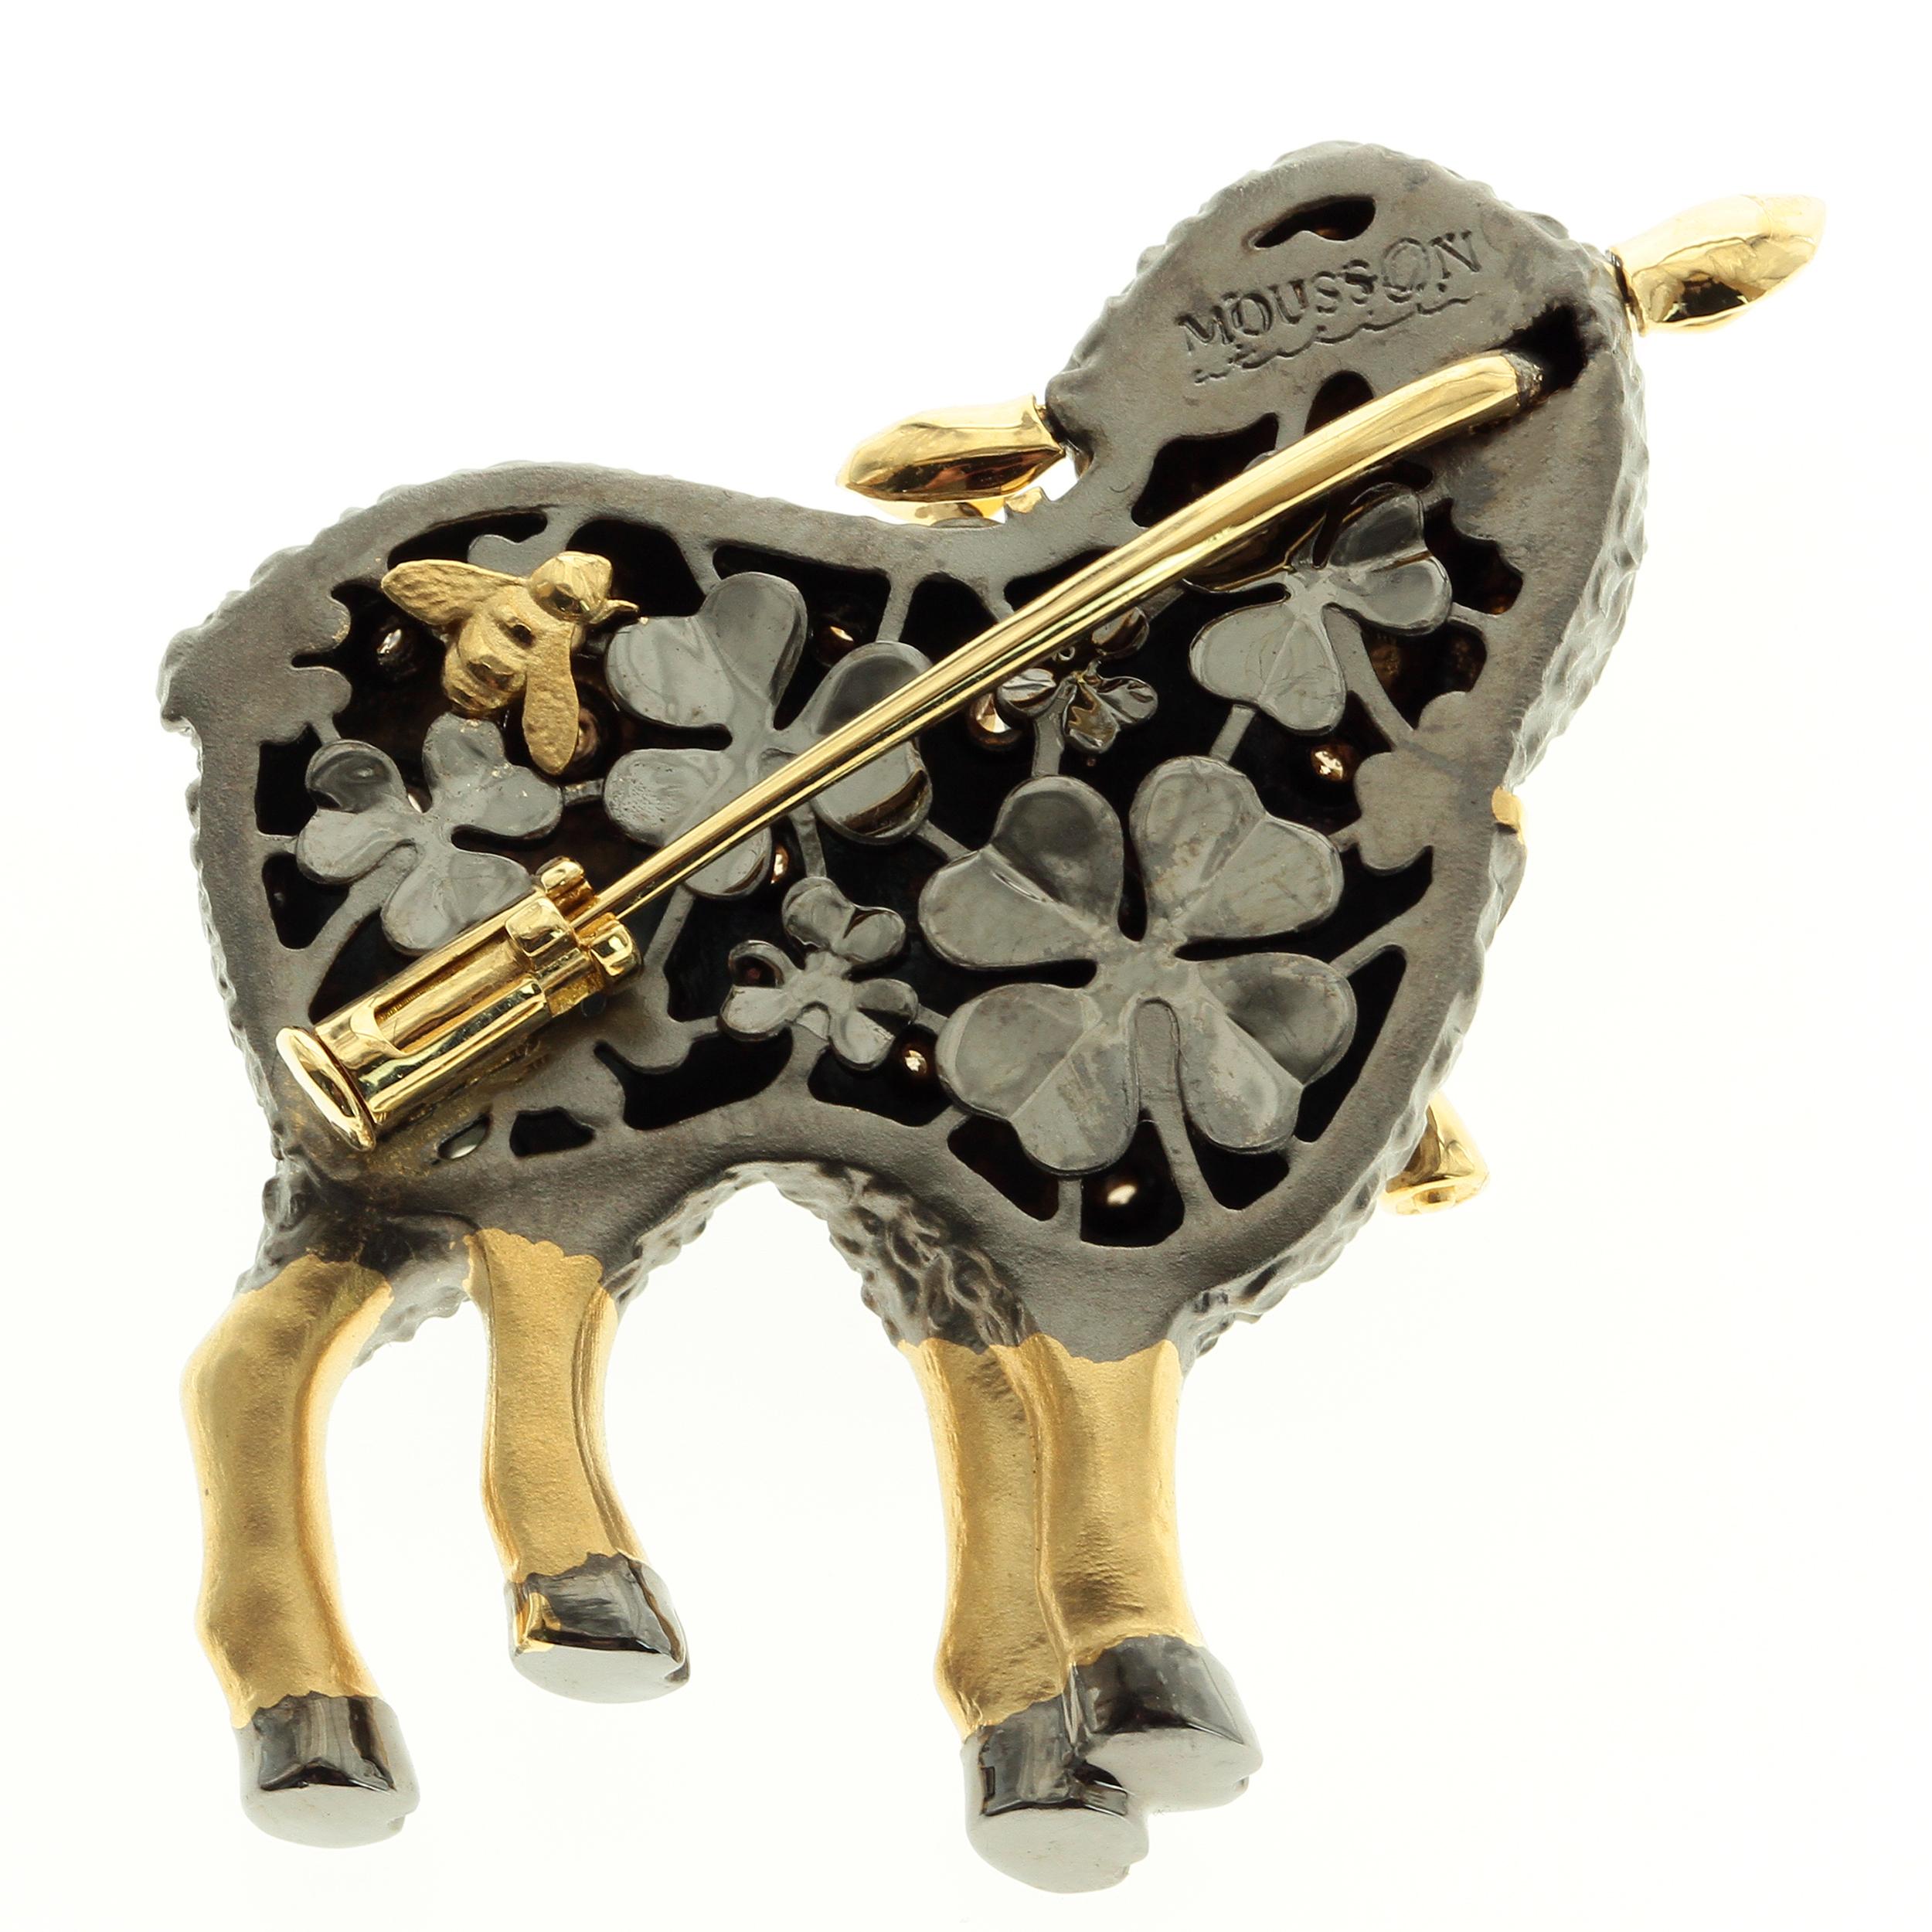 Diamond 18 Karat Yellow Black Gold Sheep Brooch
On the backside, you will find the clоver field and the Bee. The ears and neck bell are dangling.

33mm x 31mm x 9mm
15.81 gms
